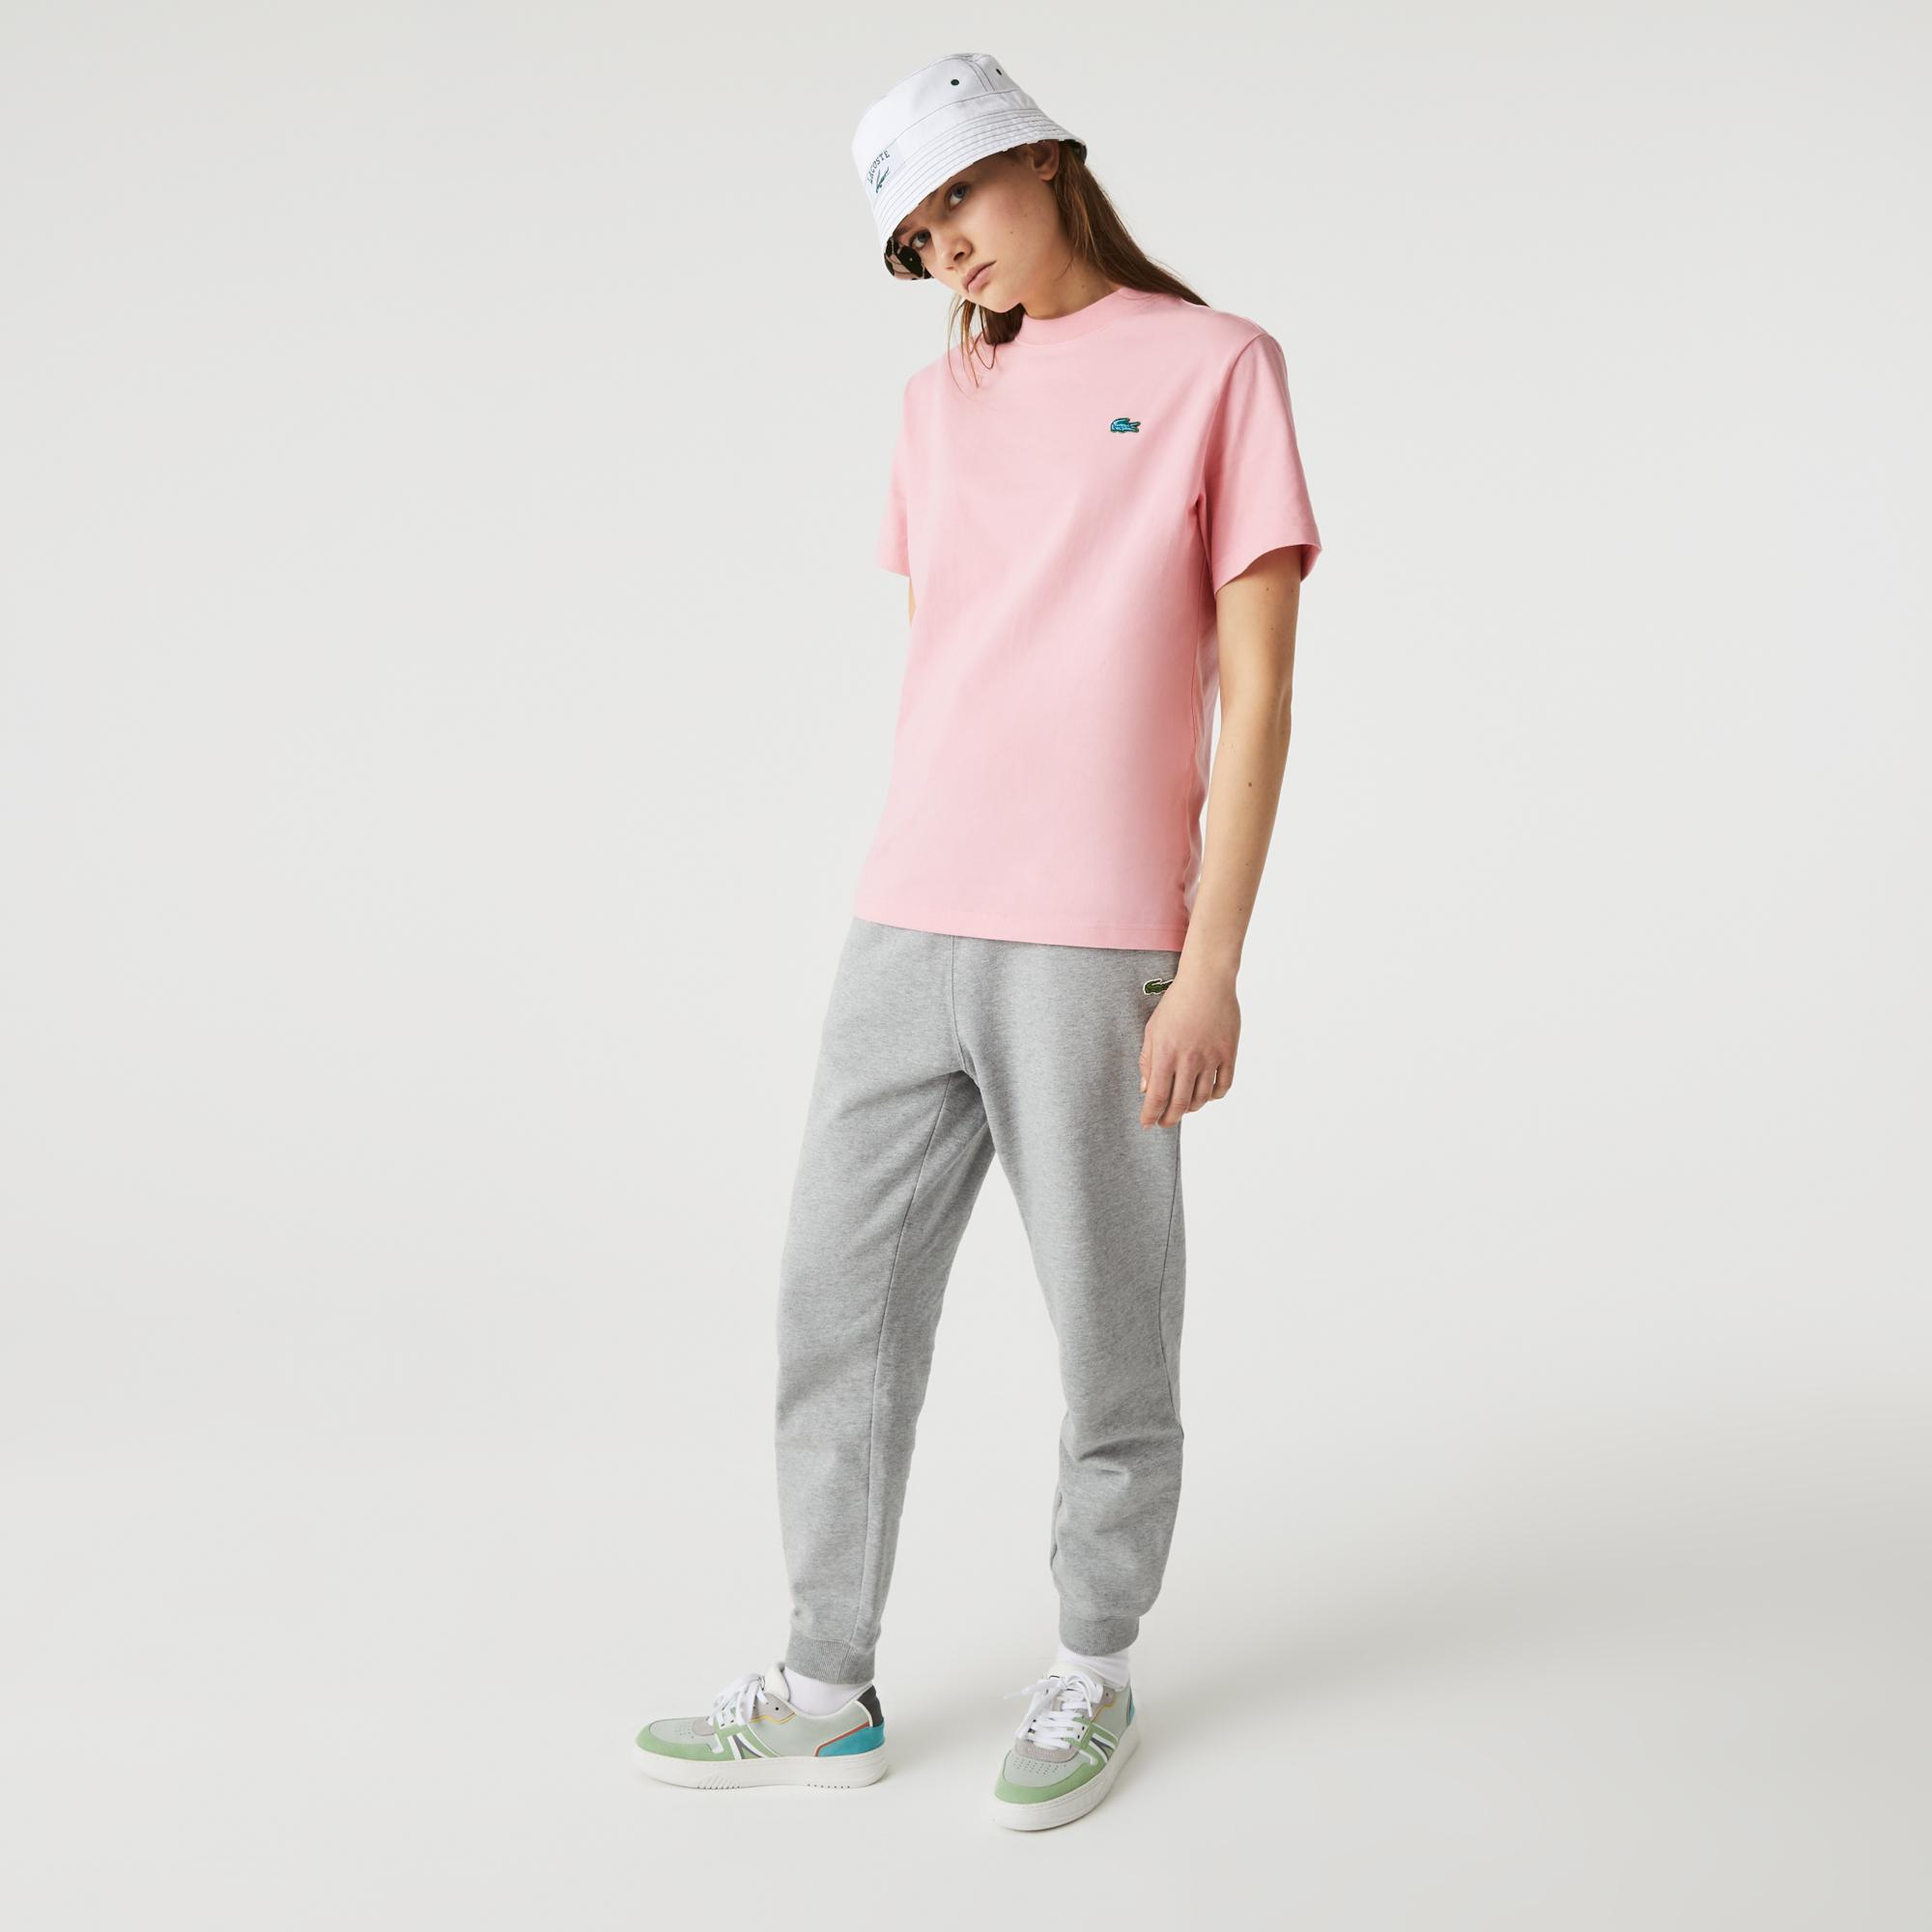 Lacoste L!VE Unisex Relaxed Fit Bisiklet Yaka Pembe T-Shirt. 3